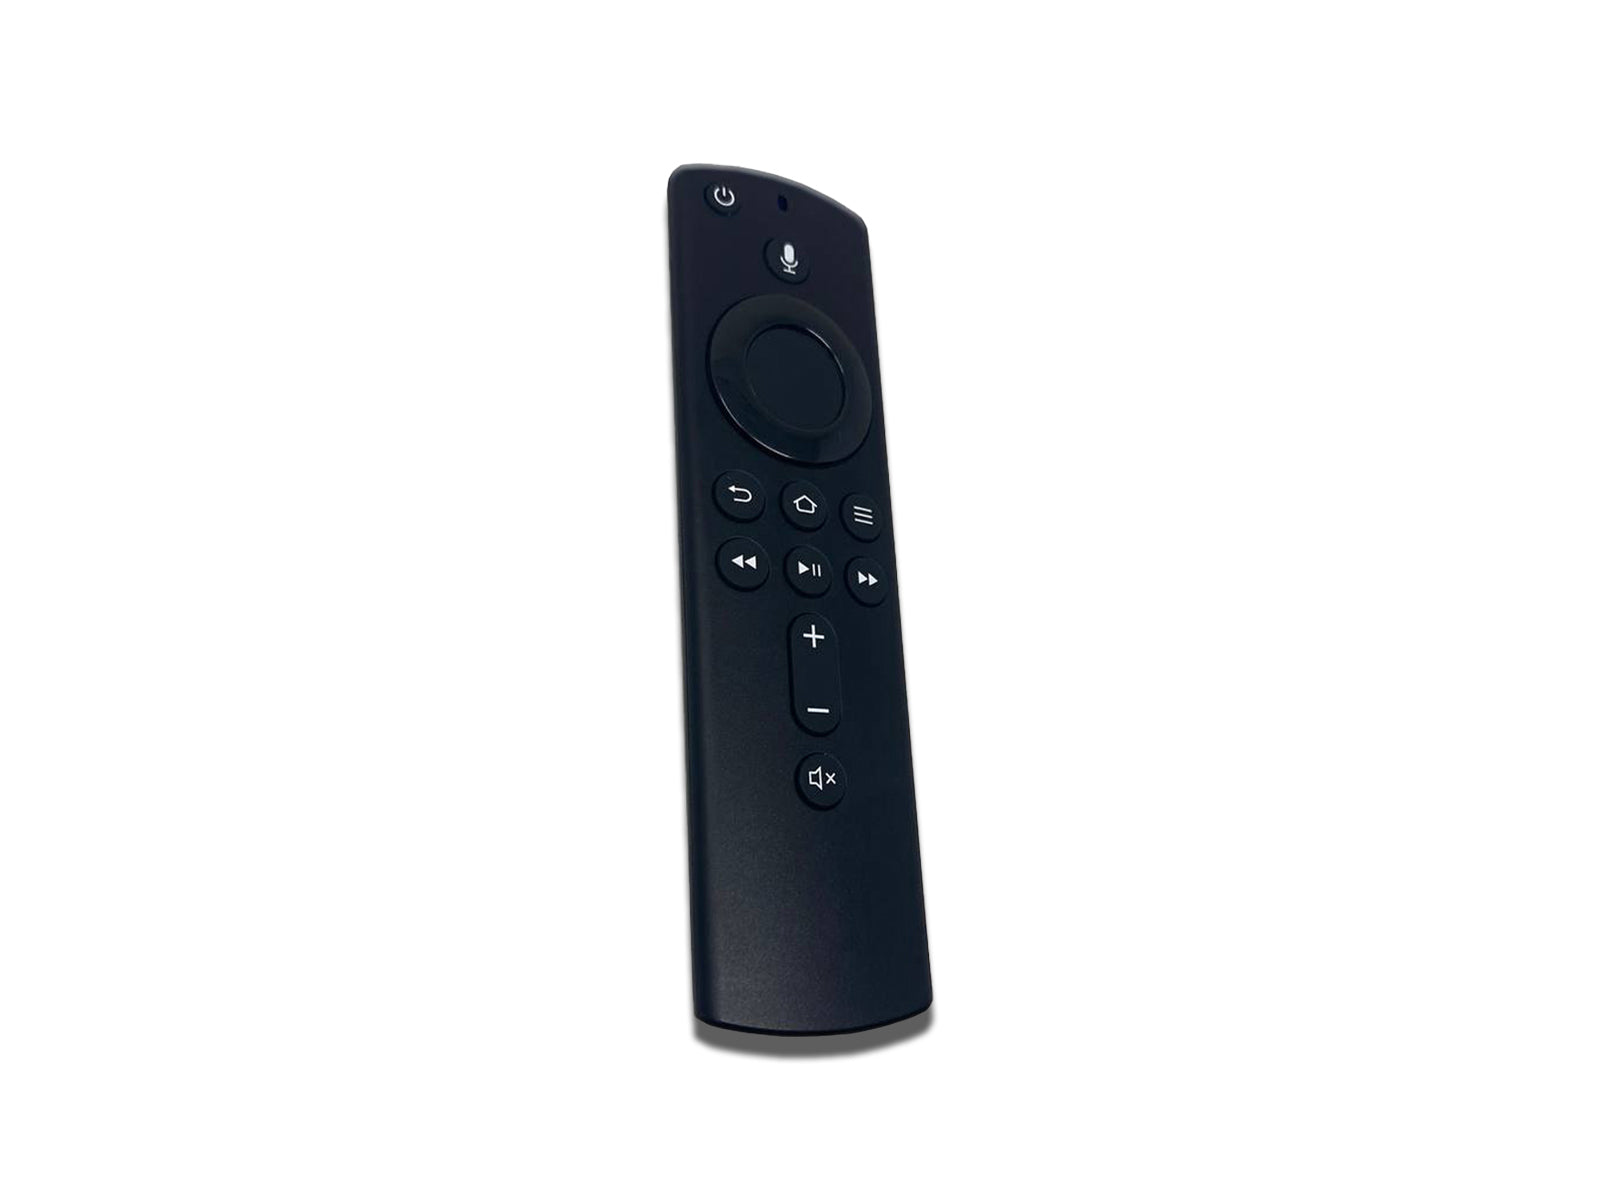 Left side image of the fire stick remote 2nd gen on the white background